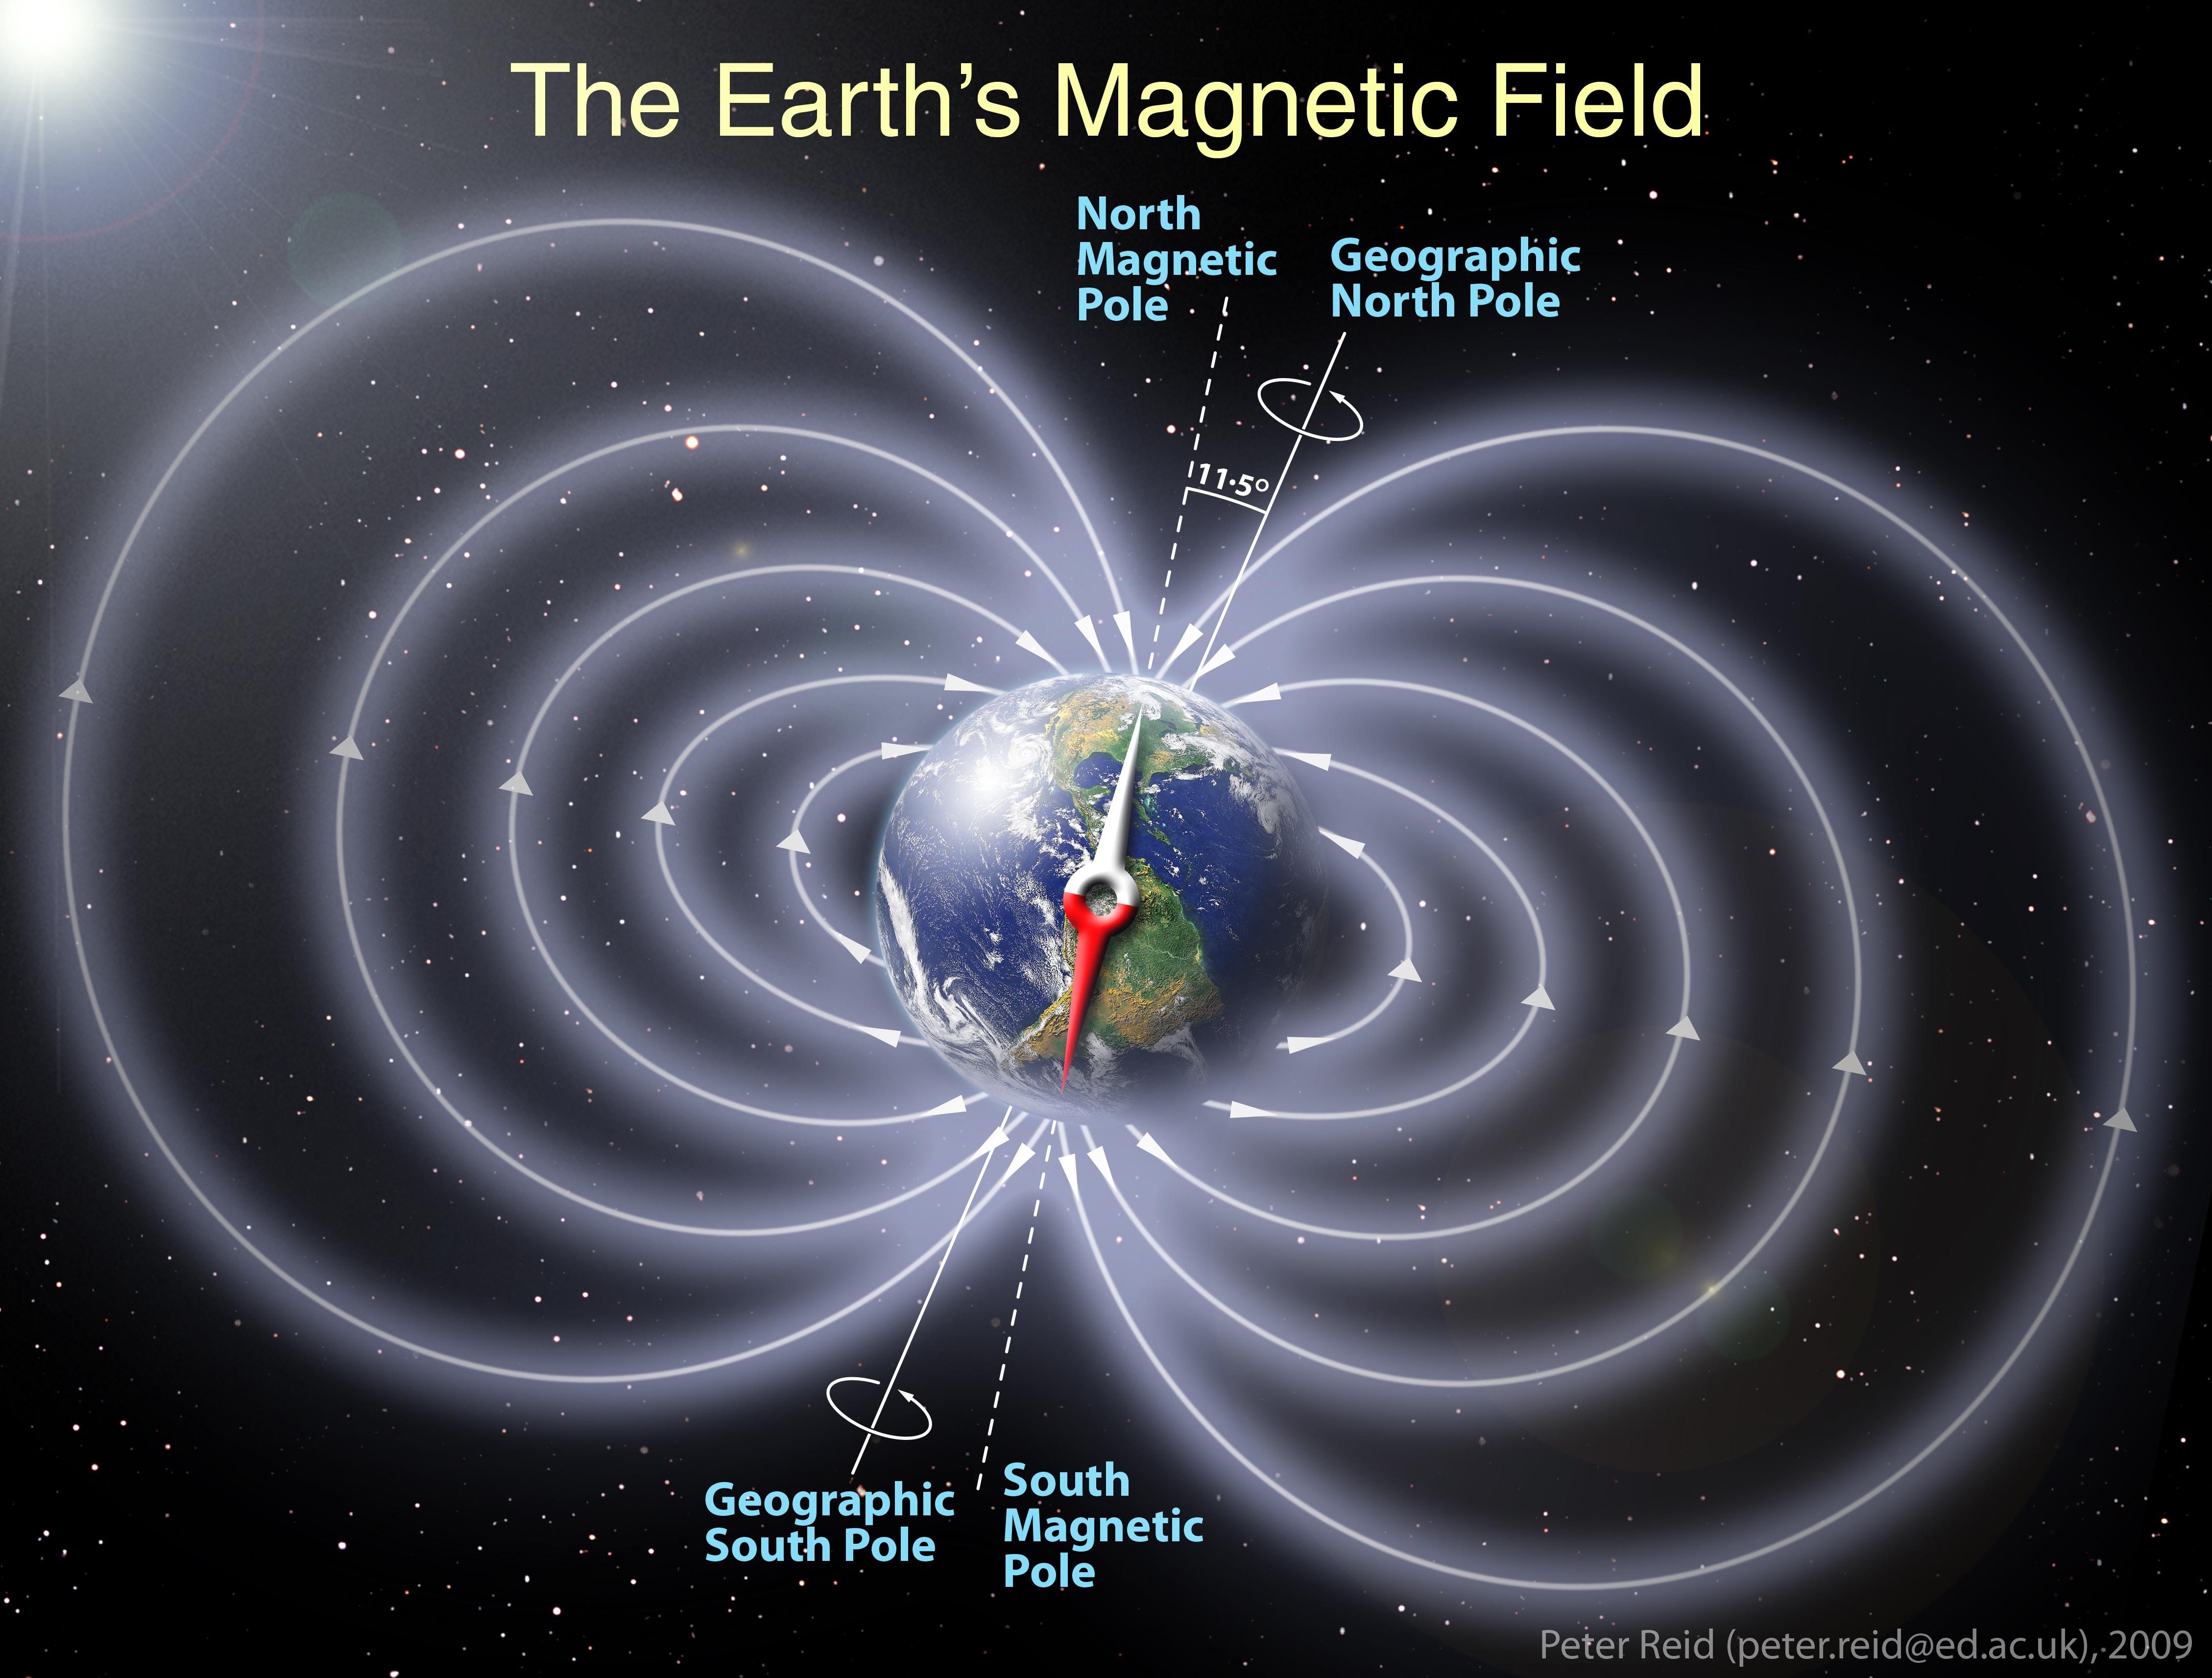 http://www.nasa.gov/mission_pages/sunearth/news/gallery/Earths-magneticfieldlines-dipole.htmlenter image source here